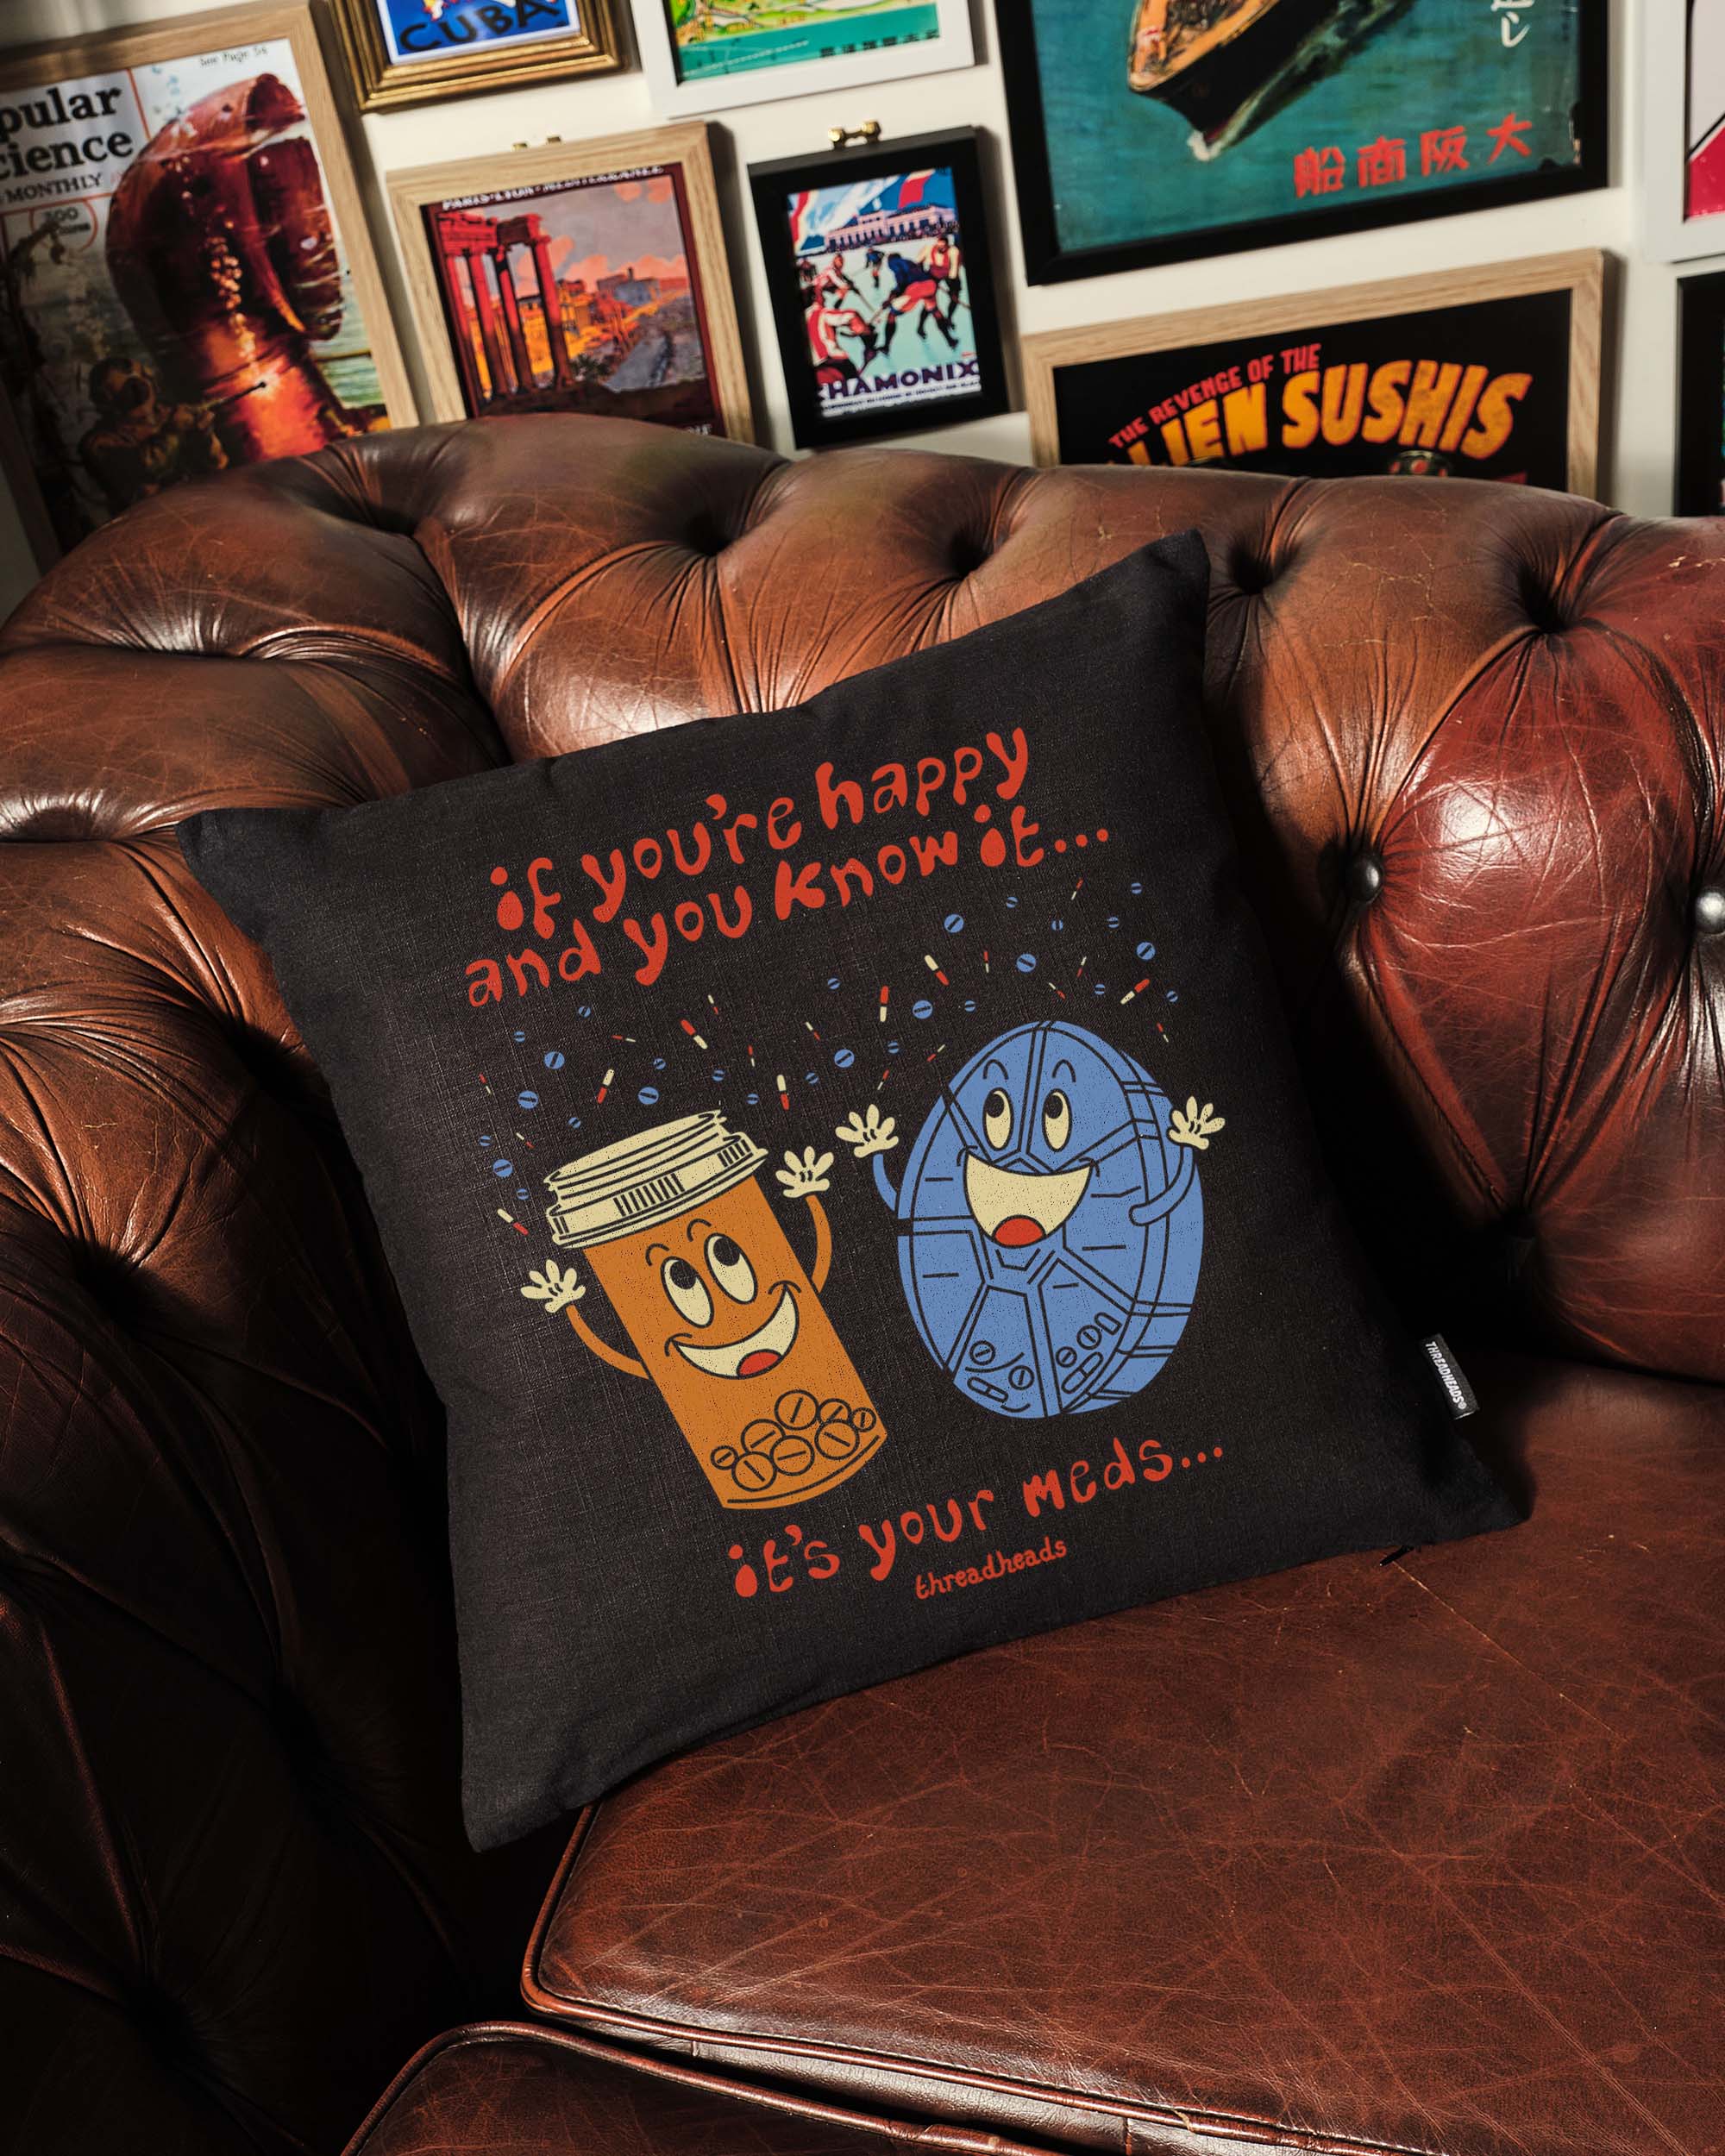 It's Your Meds Cushion